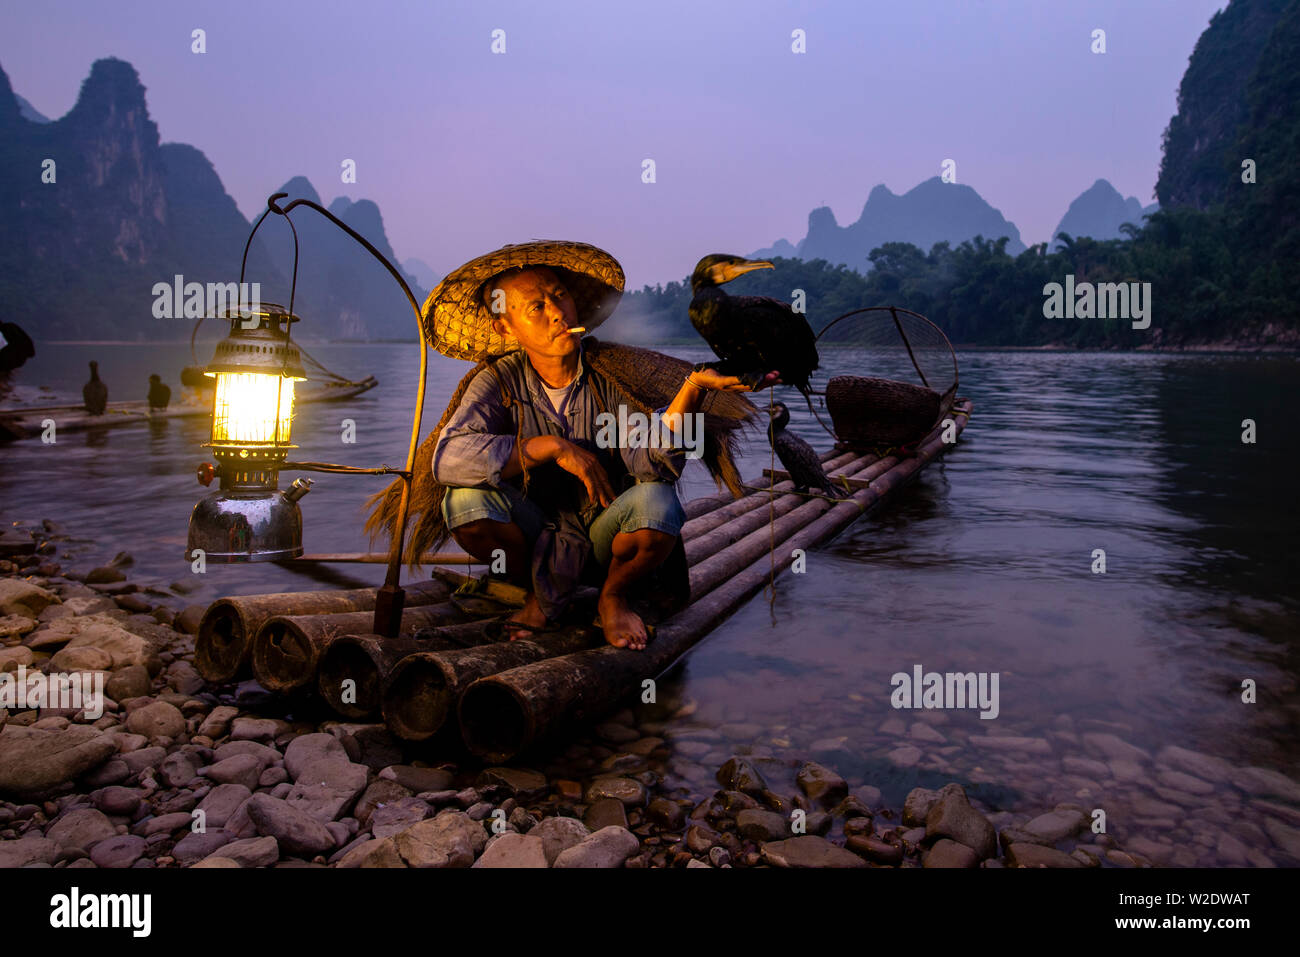 https://c8.alamy.com/comp/W2DWAT/guilin-china-september-19-2017-chinese-fisherman-demonstrates-an-ancient-method-of-fishing-by-using-a-trained-cormorant-to-fish-in-the-river-W2DWAT.jpg